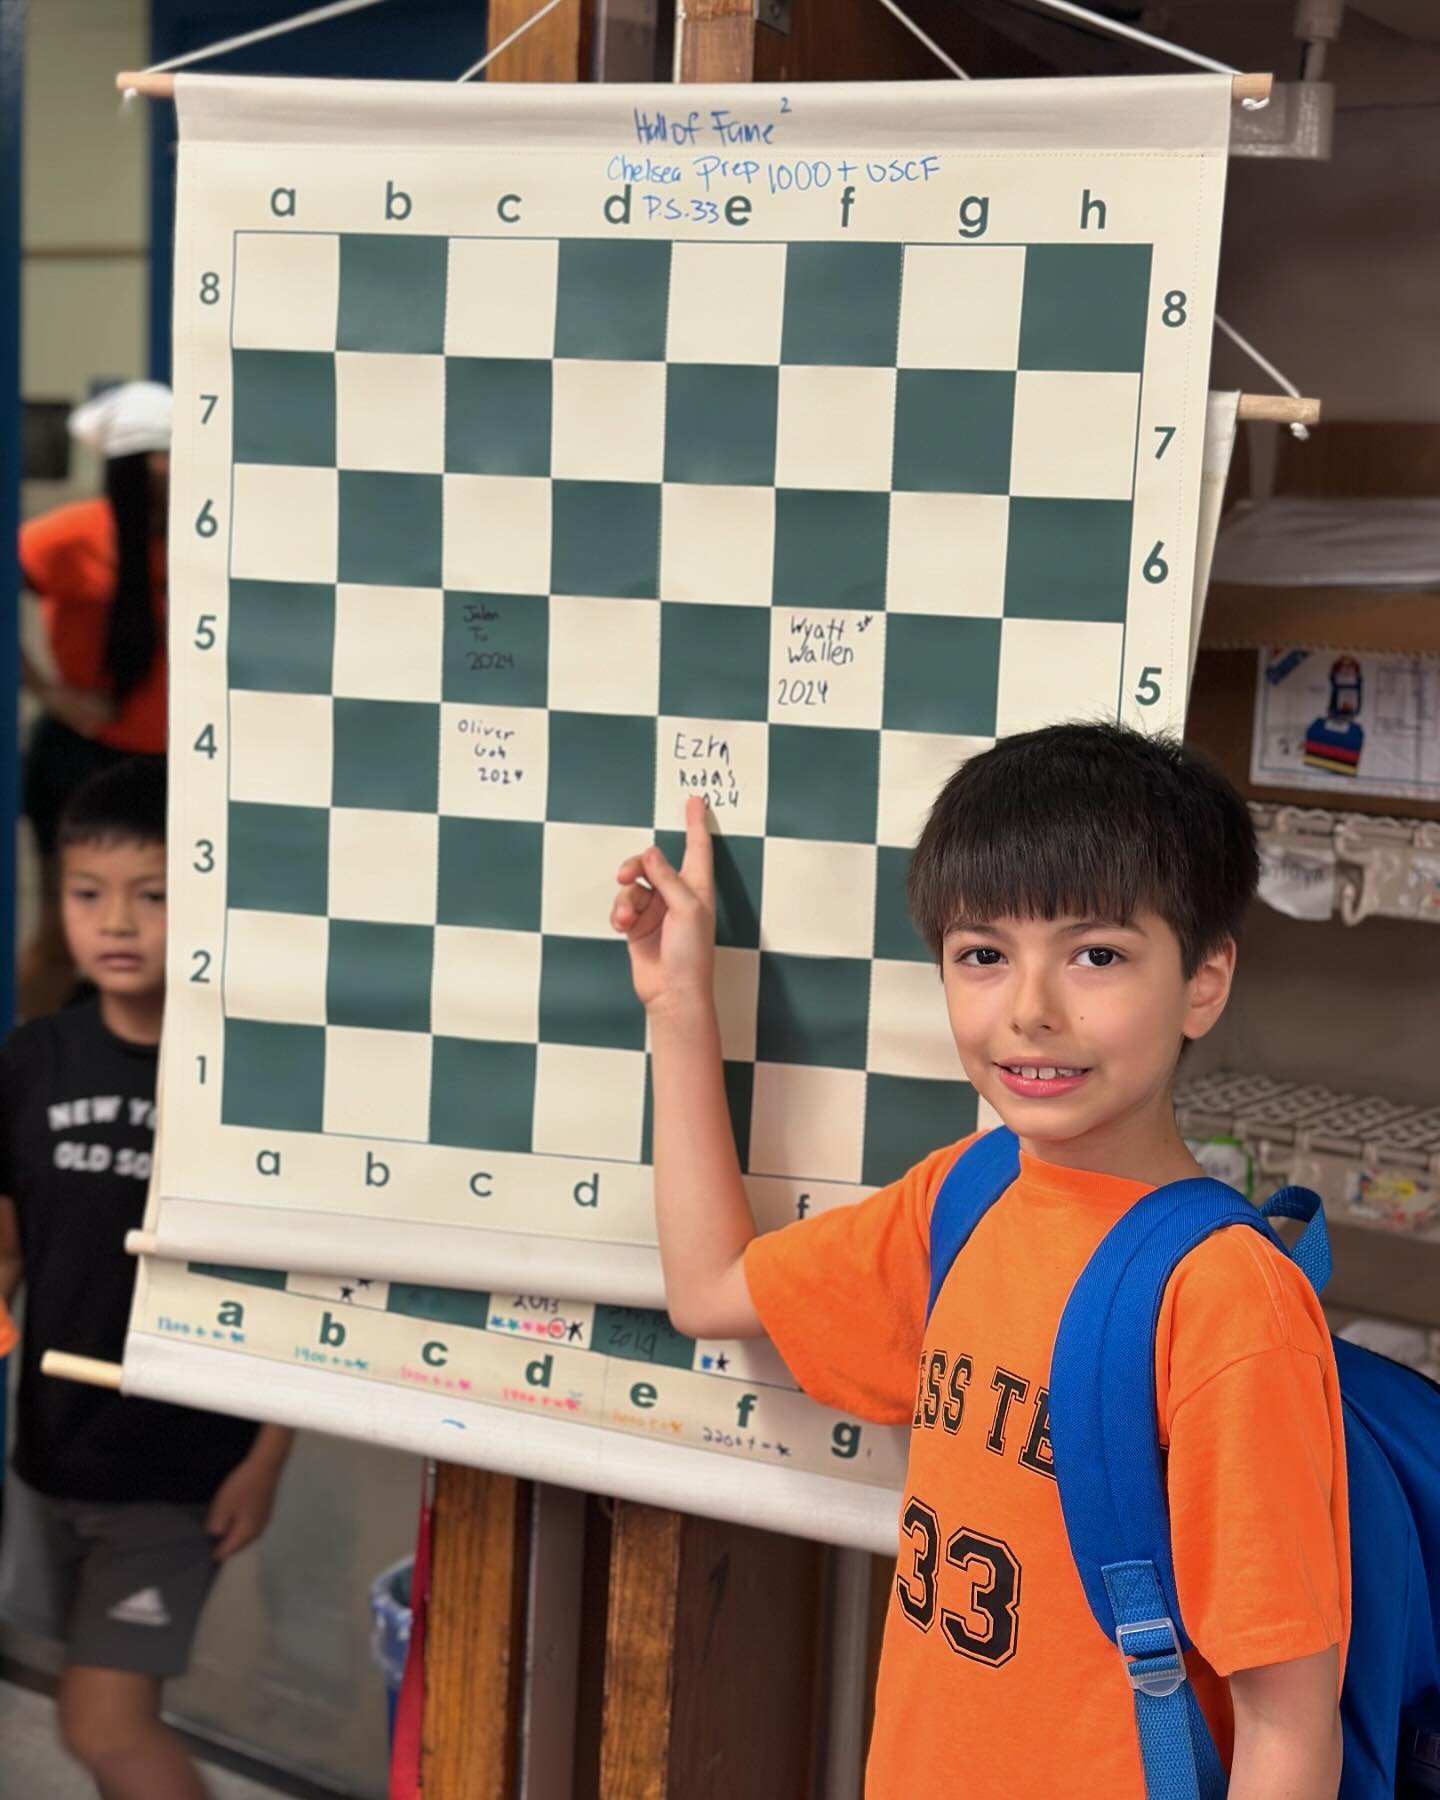 Join us in congratulating Ezra on breaking 1000! Ezra has gained 700+ rating points this school year! #1000plususcf #ps33chess #chelseaprepchess #legendsoftomorrow #workhardplayhard #halloffame